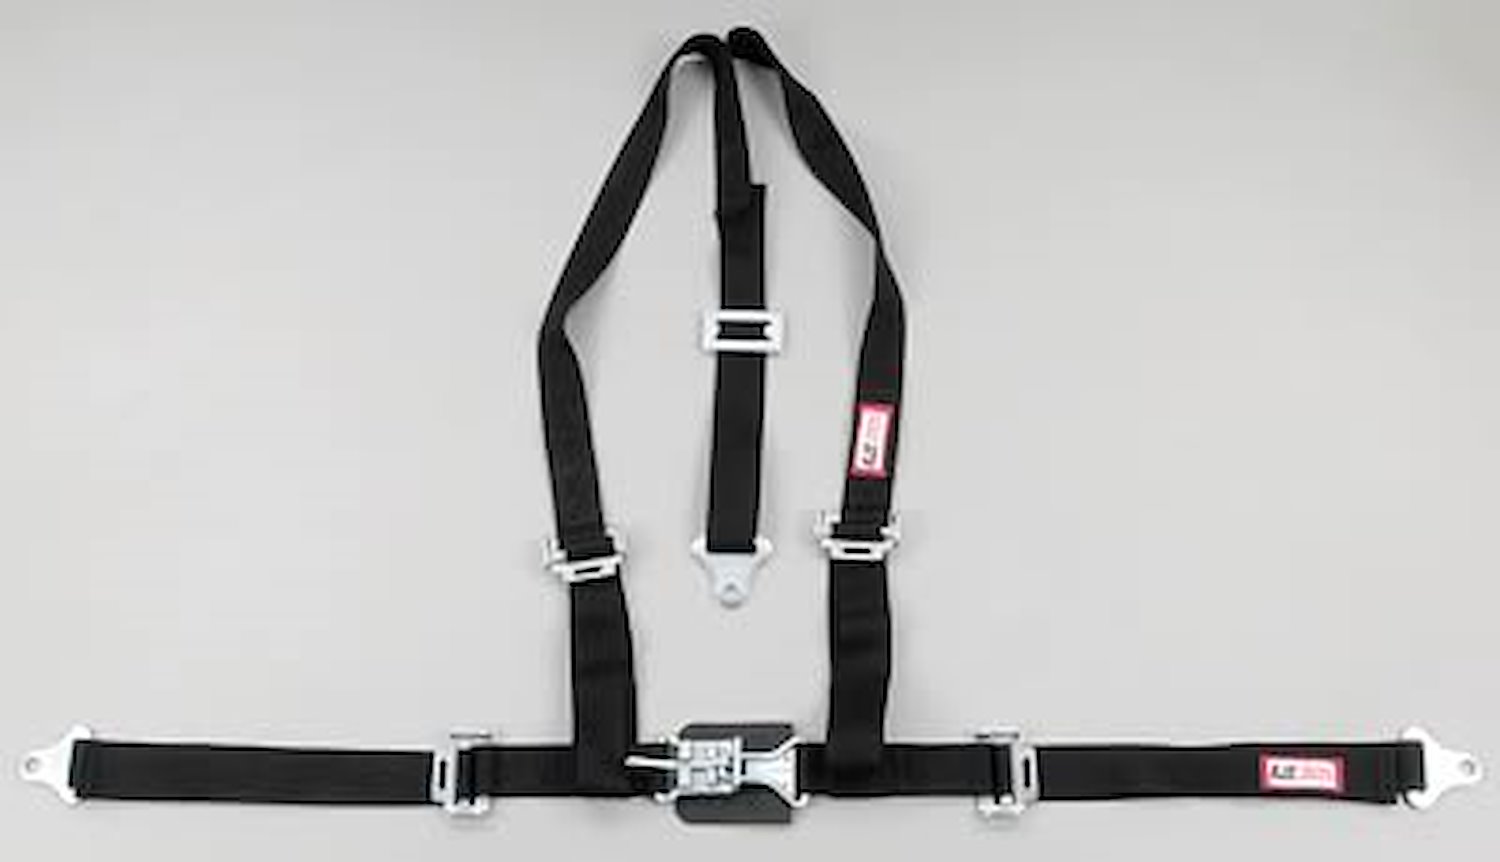 NON-SFI L&L HARNESS 2 PULL UP Lap Belt SNAP SEWN IN 2 S.H. Individual ROLL BAR Mount w/STERNUM STRAP WRAP/SNAP RED